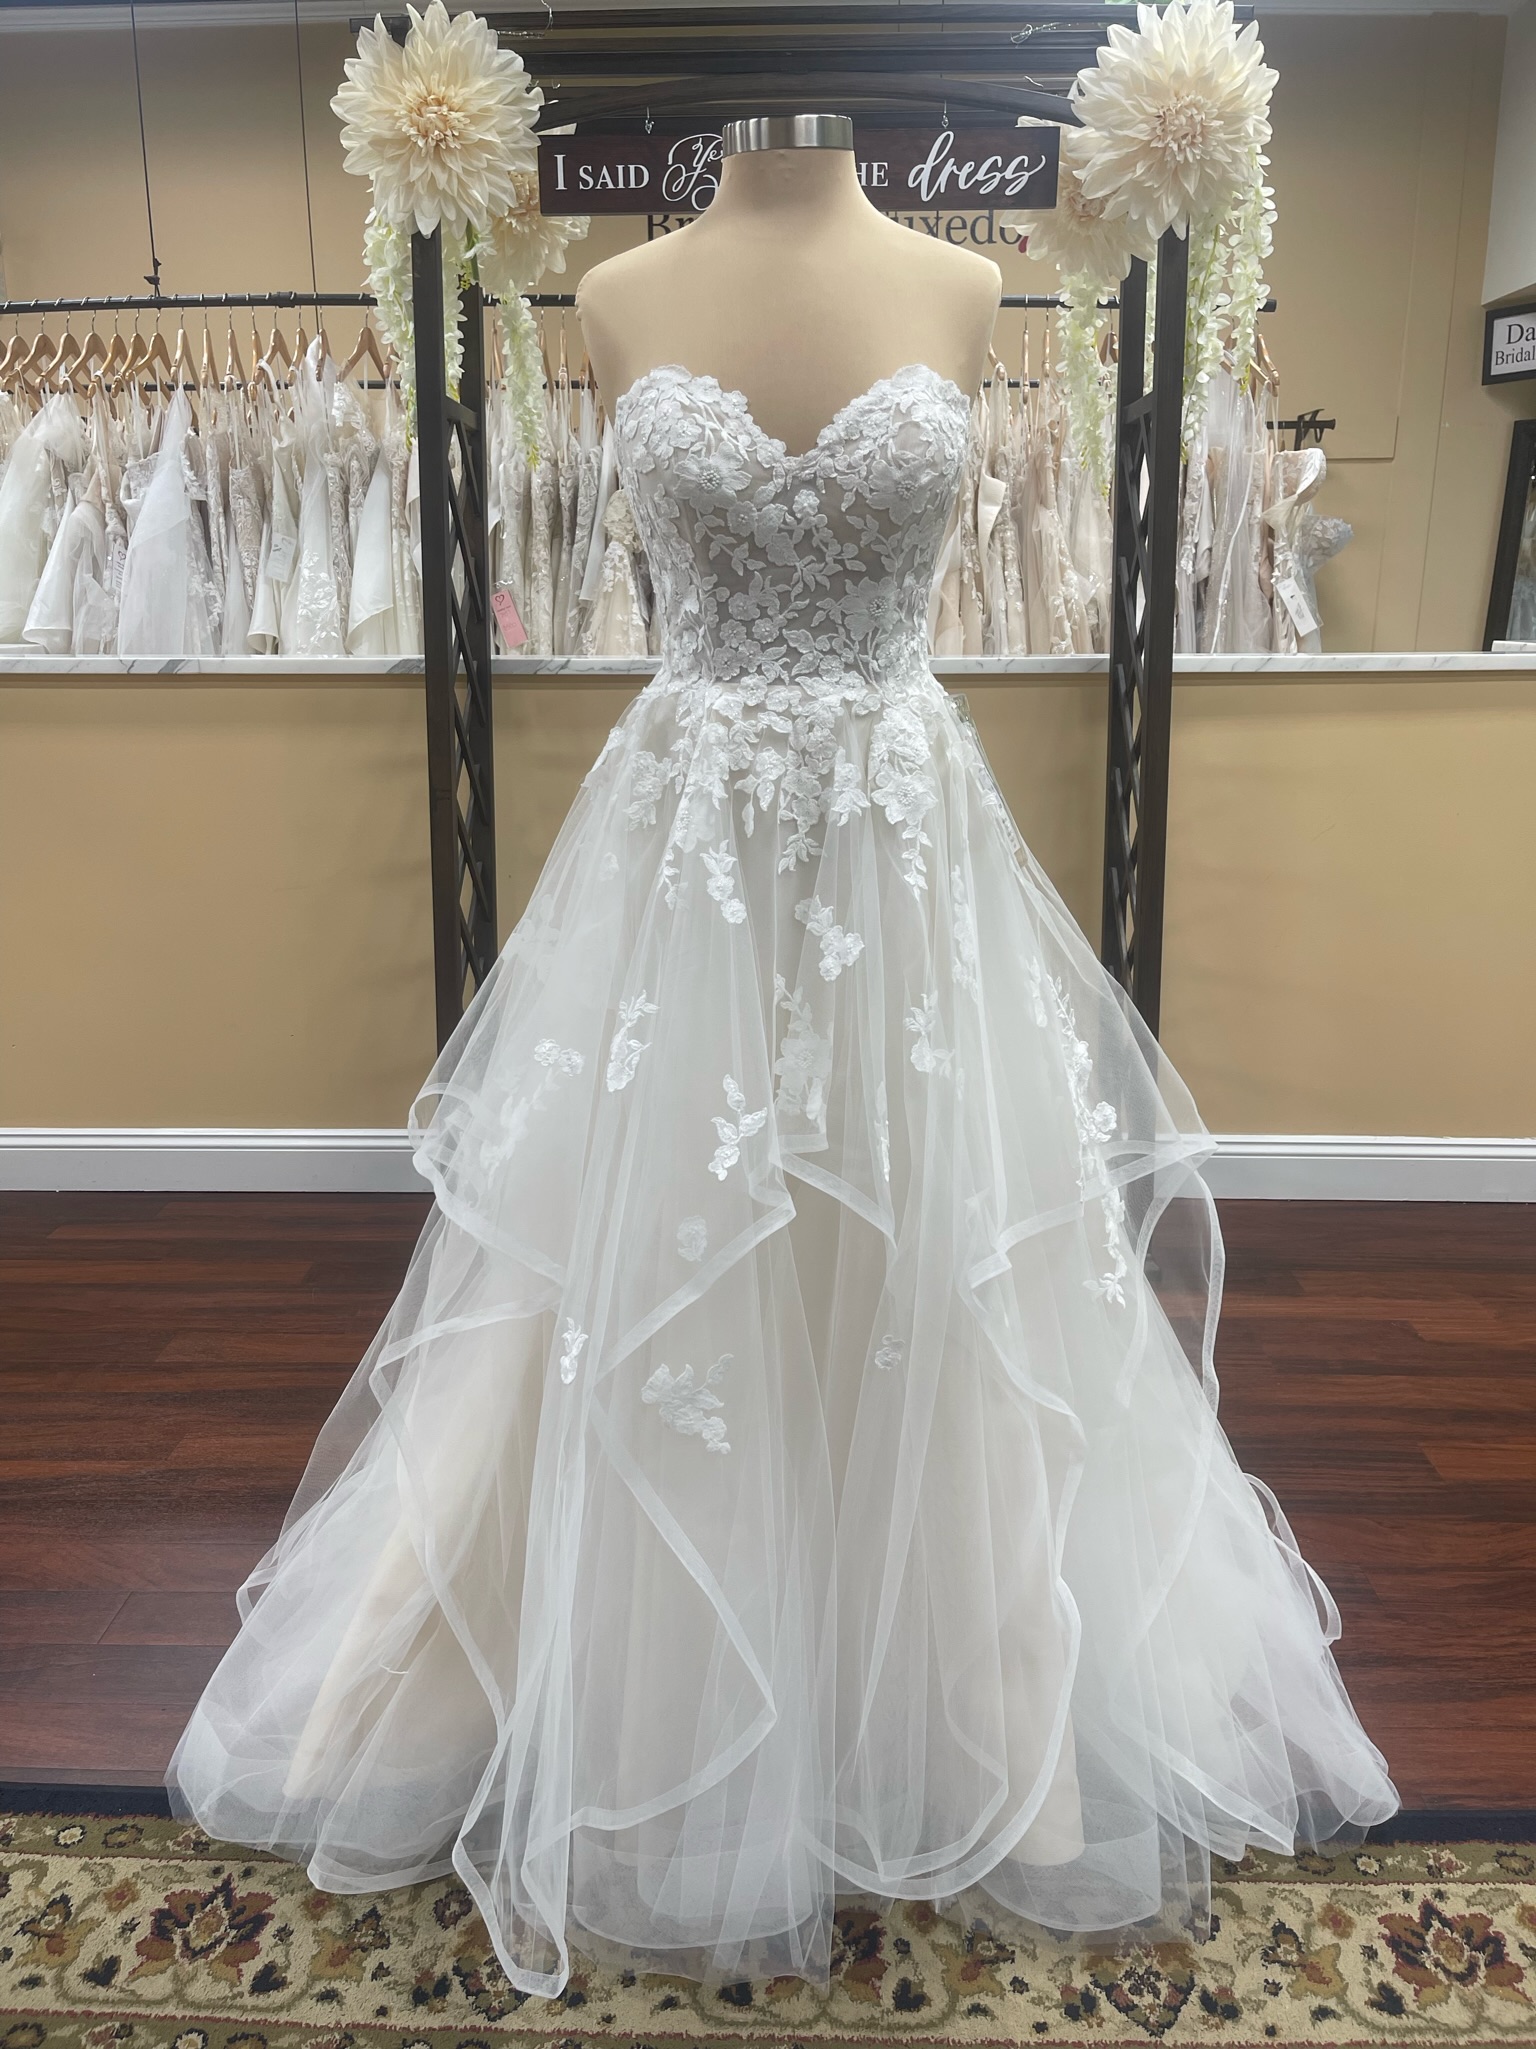 Beloved Bridal Noella dress, a tiered skirt trimmed in horsehair, sweetheart neckline, lace bodice, and detachable long sleeves at Darianna Bridal & Tuxedo, Warrington, Bucks County PA